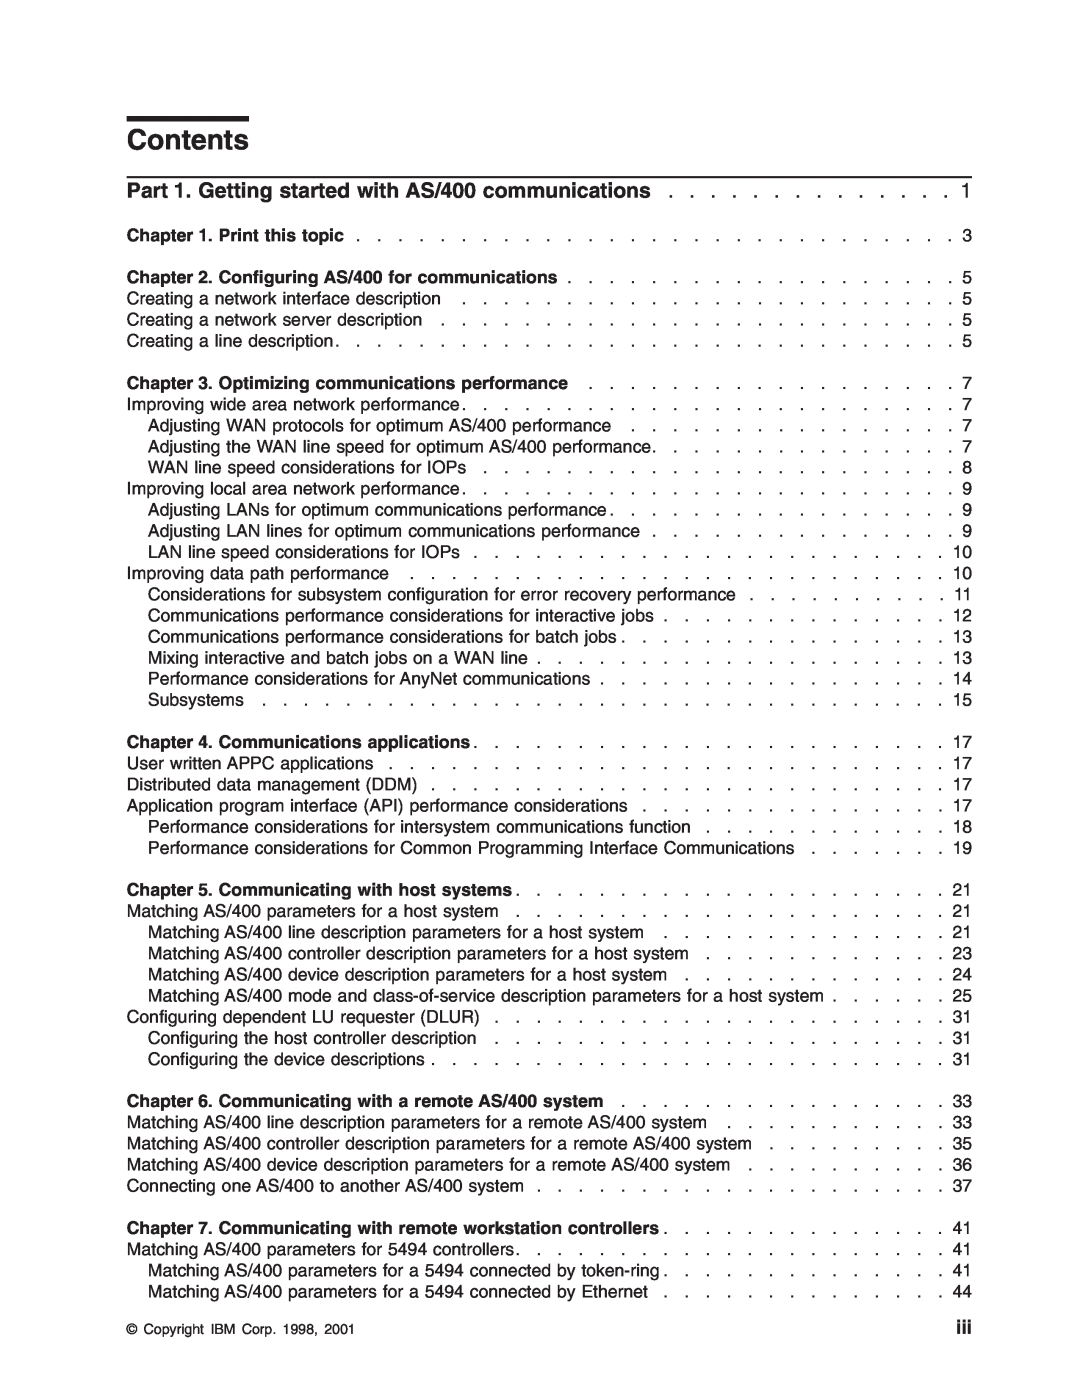 IBM manual Contents, Part 1. Getting started with AS/400 communications, Chapter, Configuring AS/400 for communications 